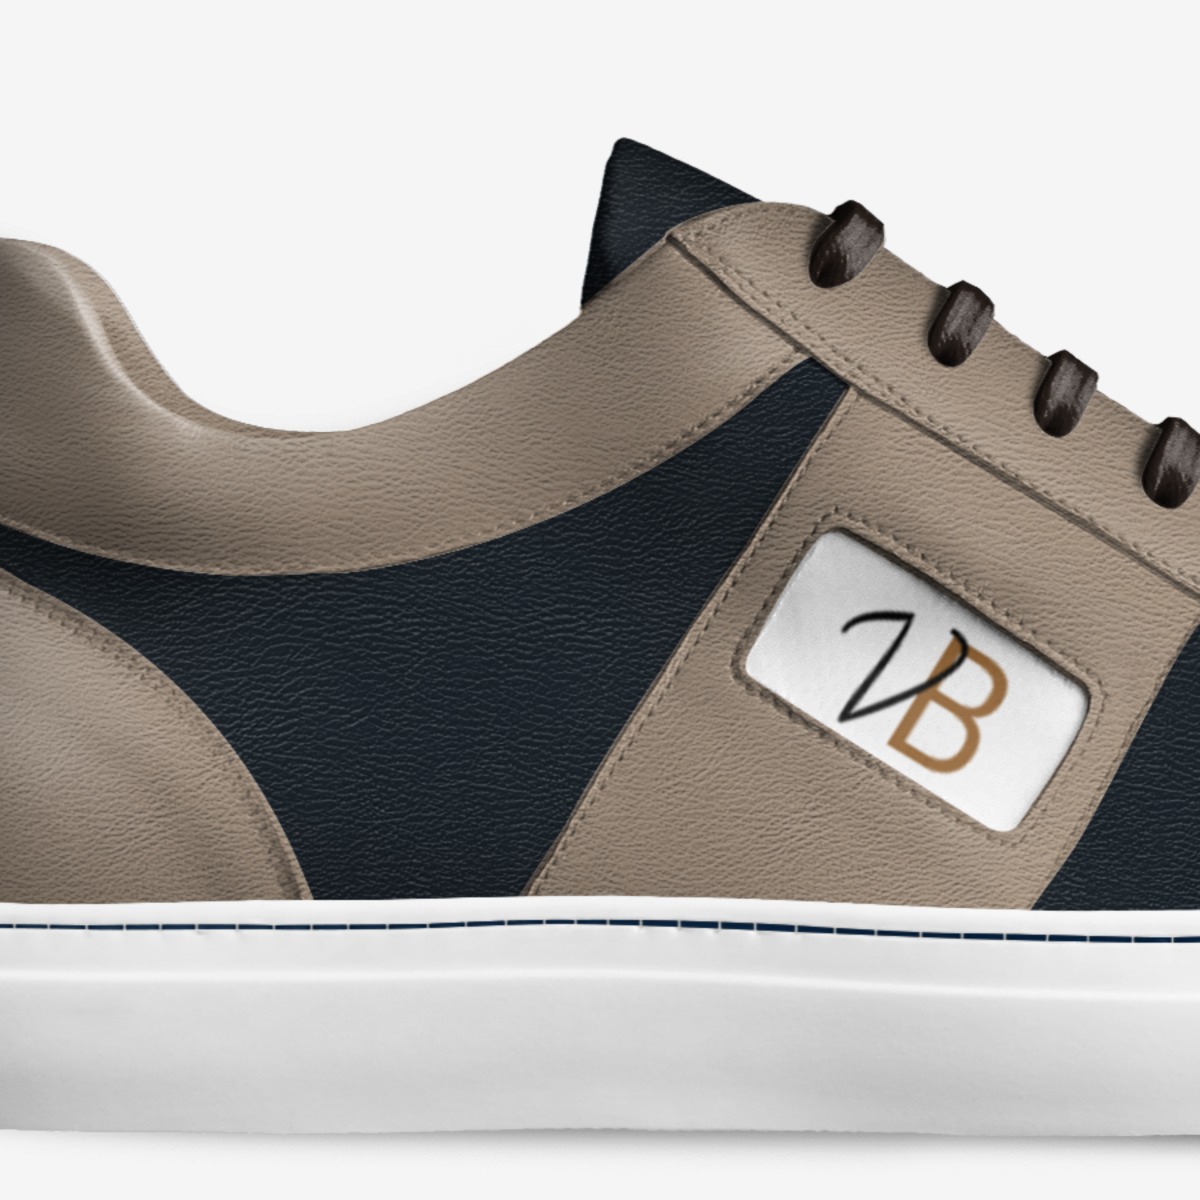 Good-looking Sneakers | A Vanessa K concept by Custom Shoe